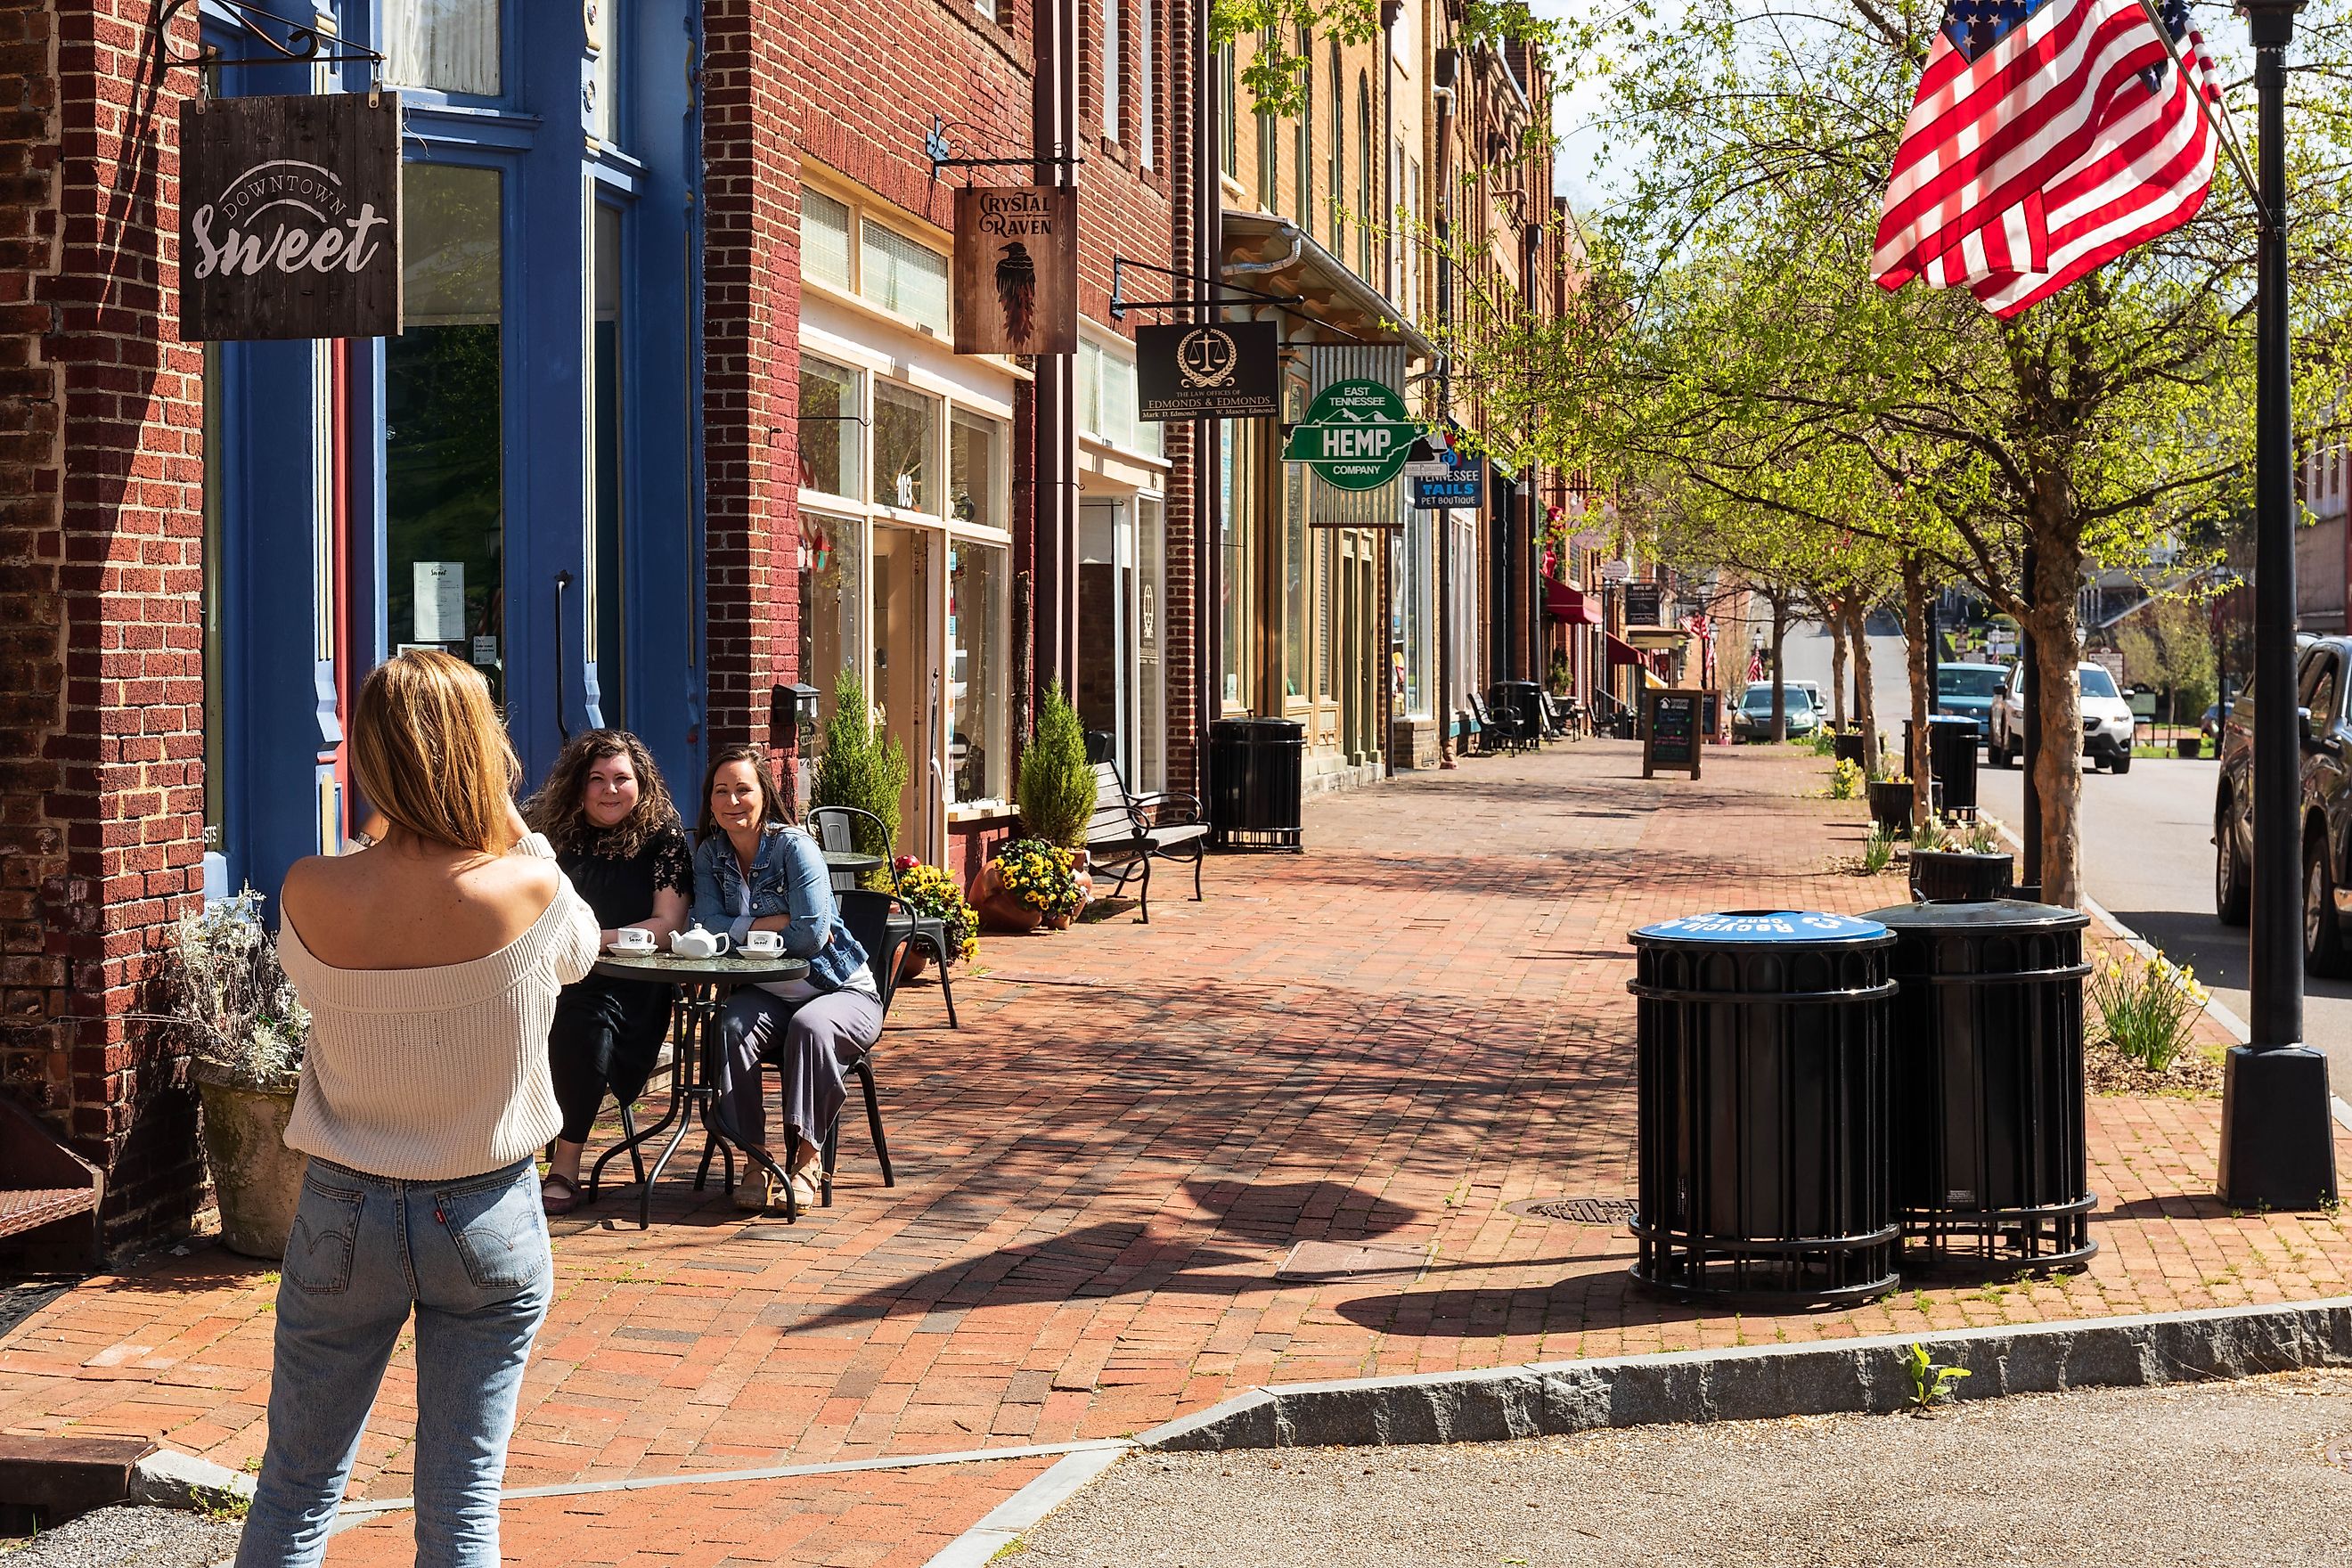 In Jonesborough, Tennessee, USA, a thin, blonde woman with her back to the camera takes a picture of two friends seated at a sidewalk table in front of the 'Downtown Sweet' coffee shop. Editorial credit: Nolichuckyjake / Shutterstock.com